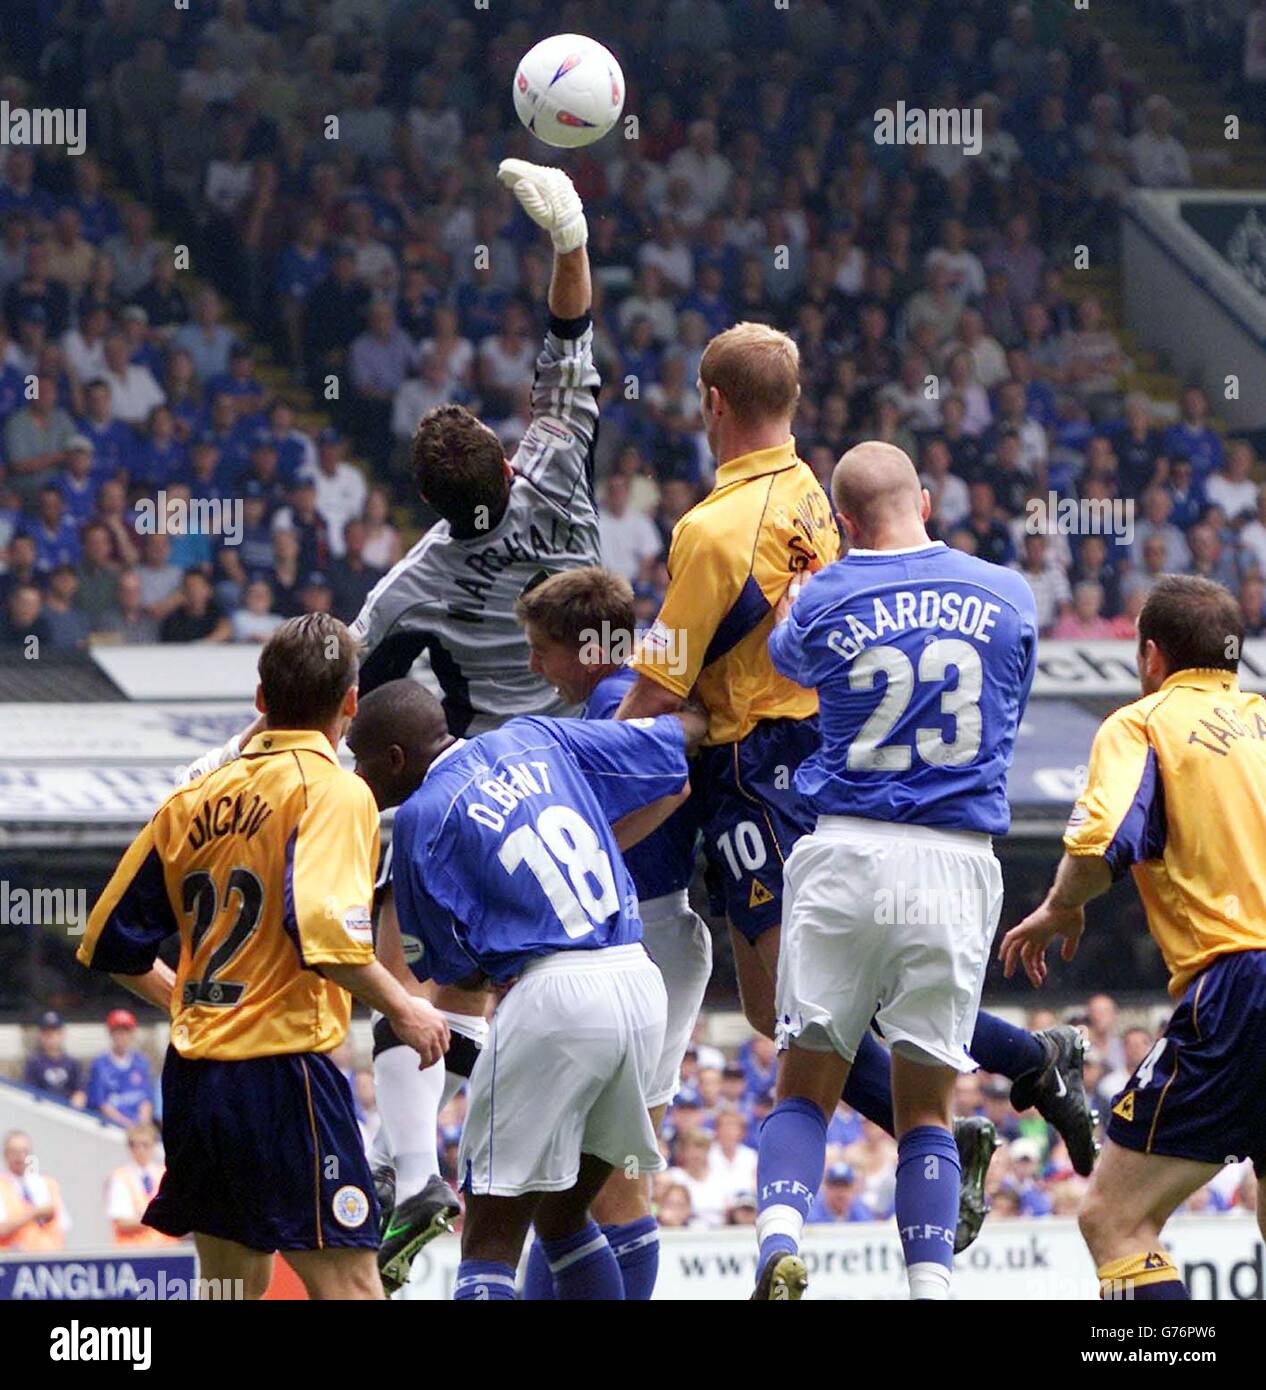 Ipswich goal keeper Andy Marshall rises above a Leicester attack during the Nationwide Division One match at Portman Road, Ipswich. NO UNOFFICIAL CLUB WEBSITE USE. Stock Photo